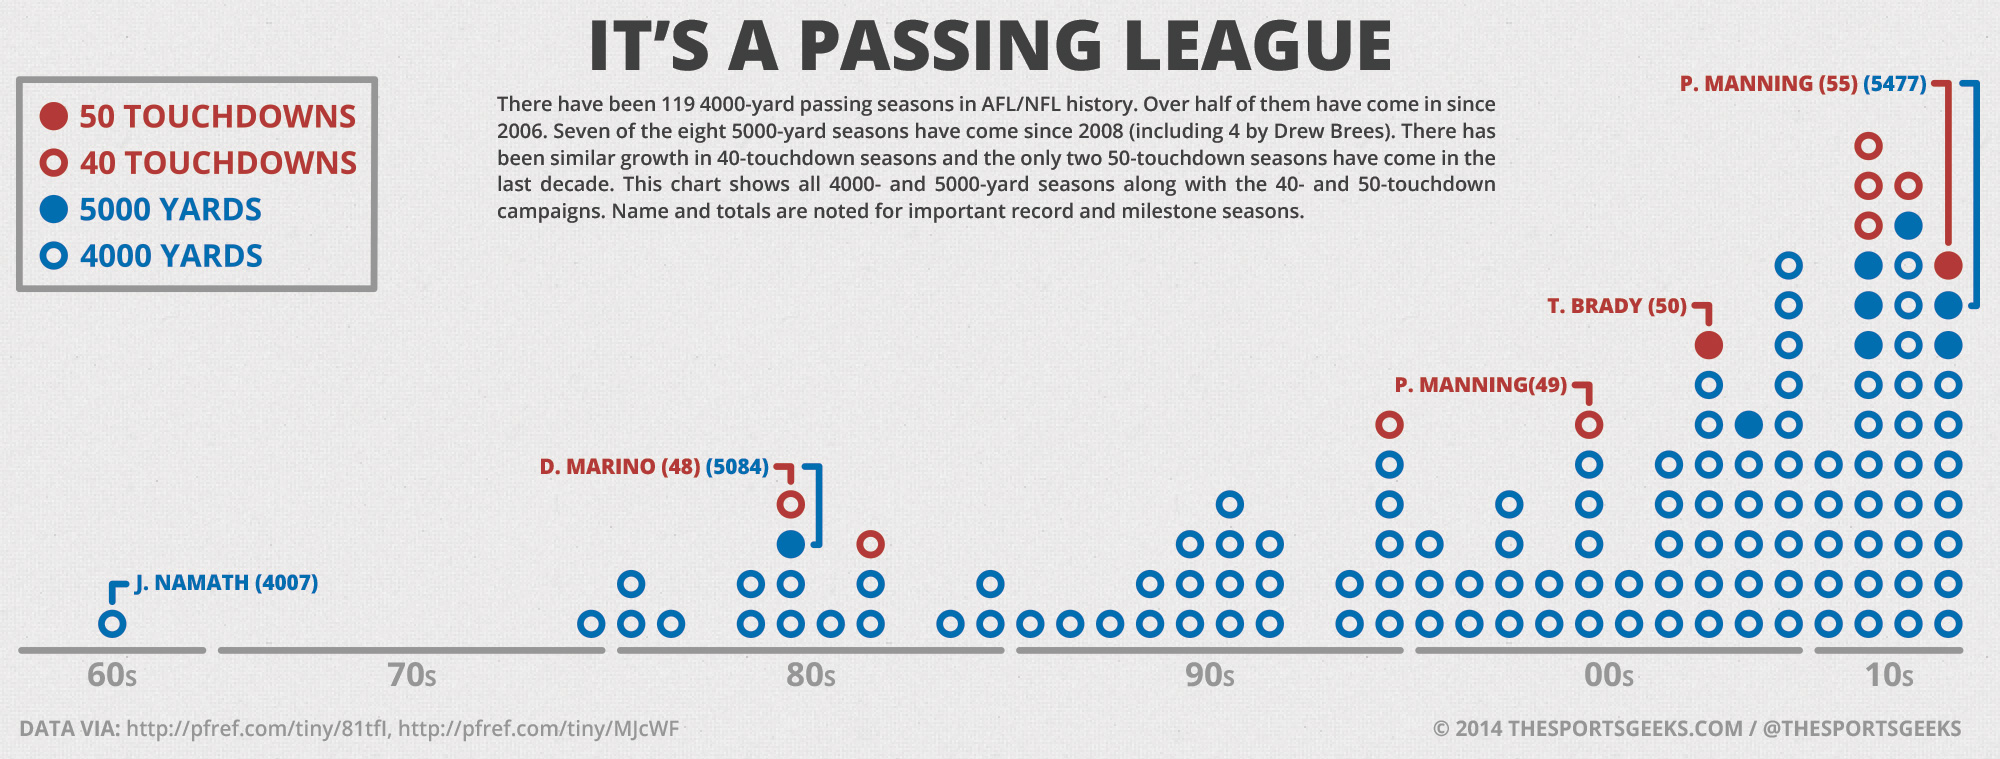 It's A Passing League Infographic By The Sports Geeks